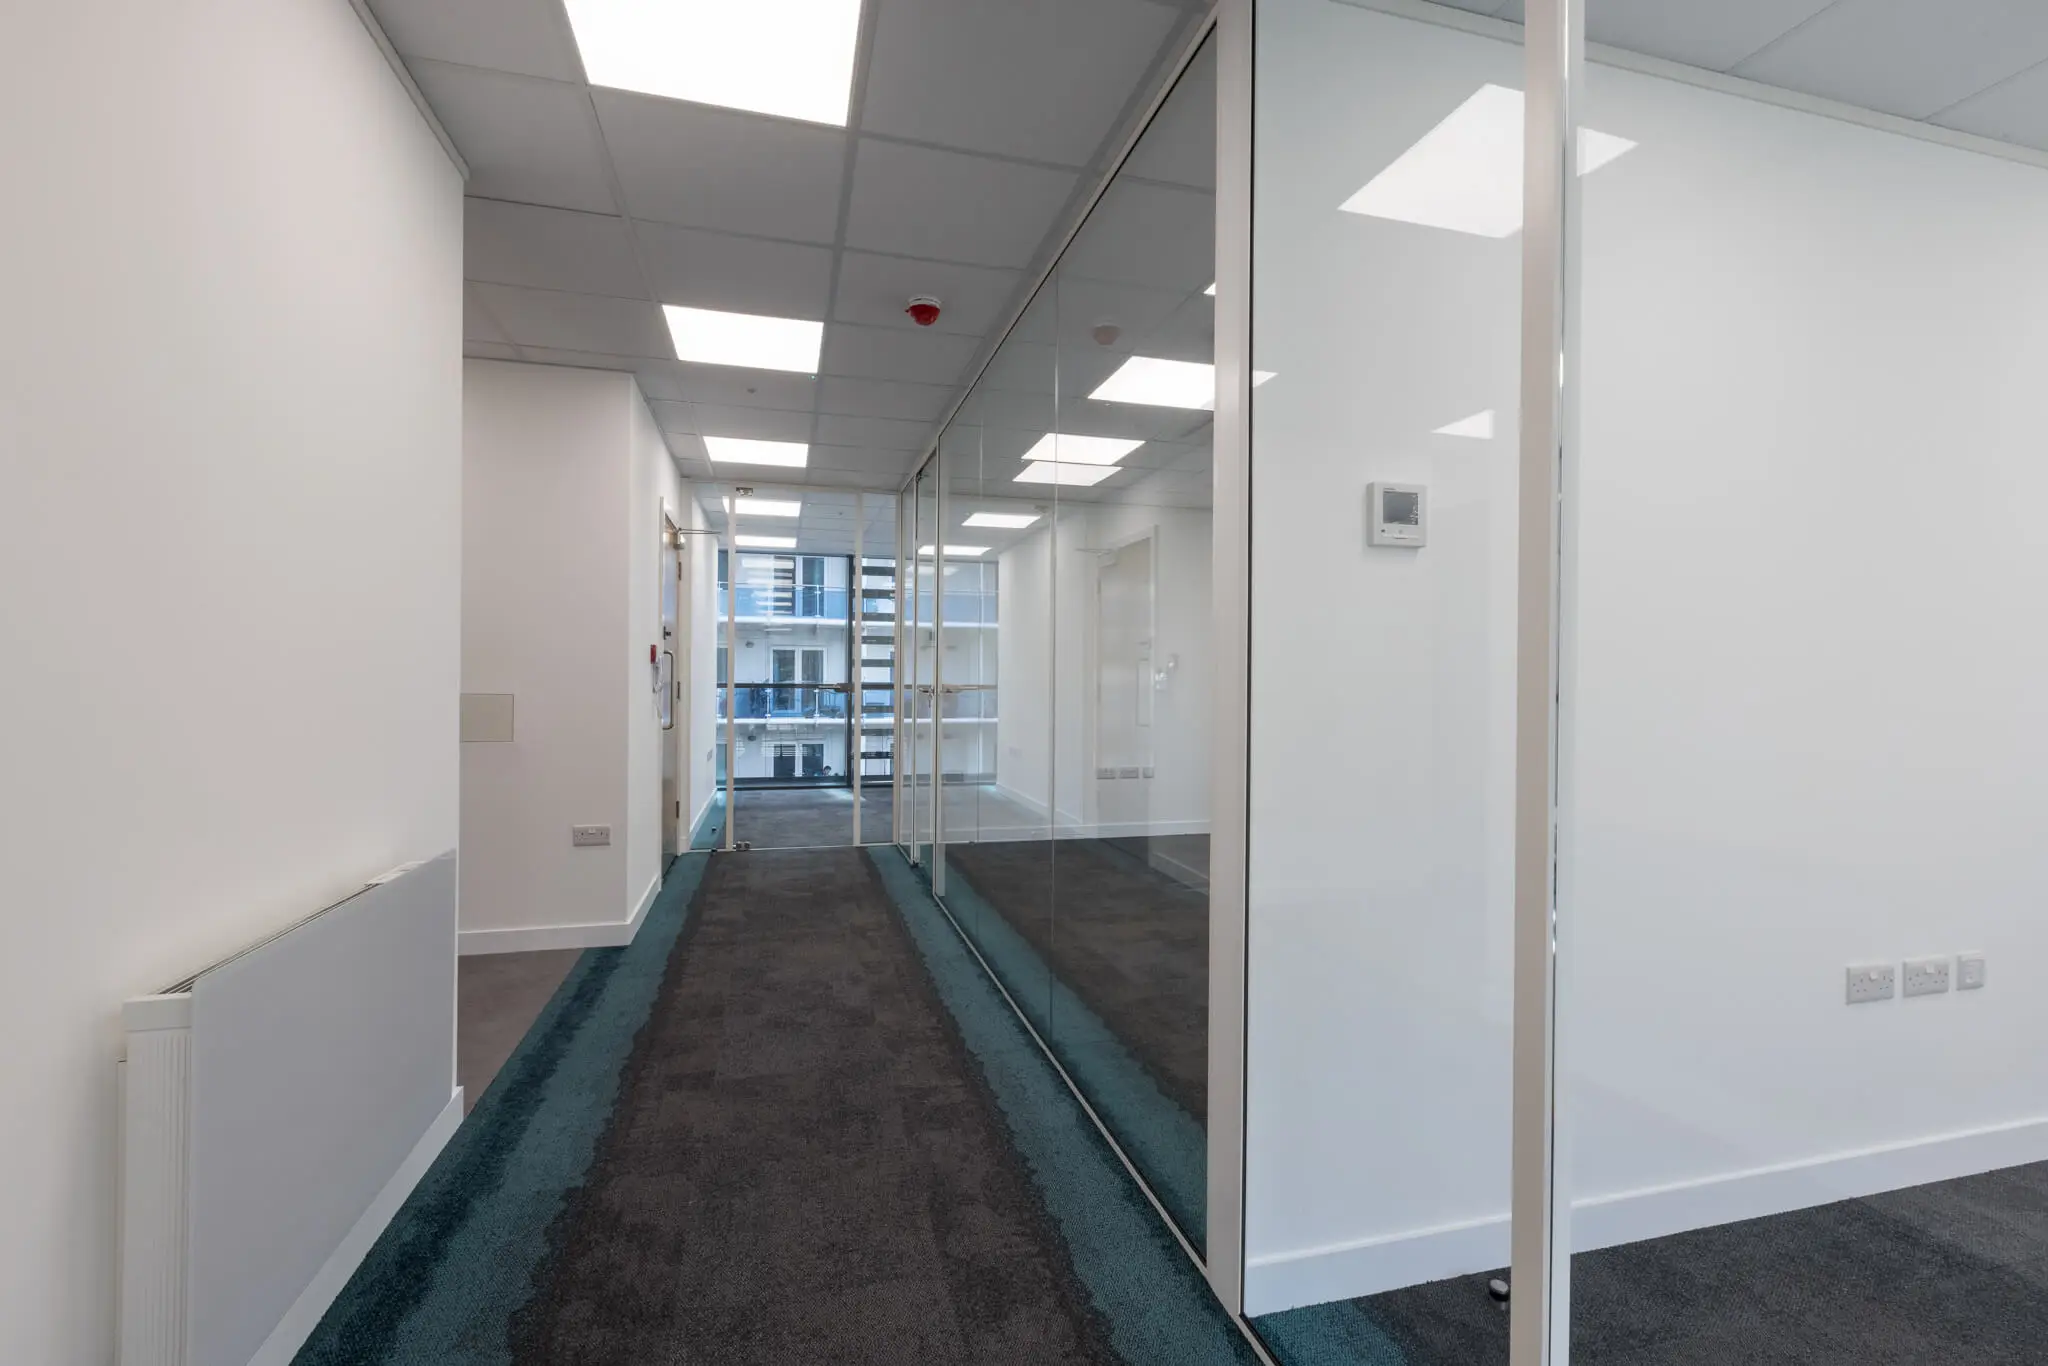 Large office space divided with glass walls